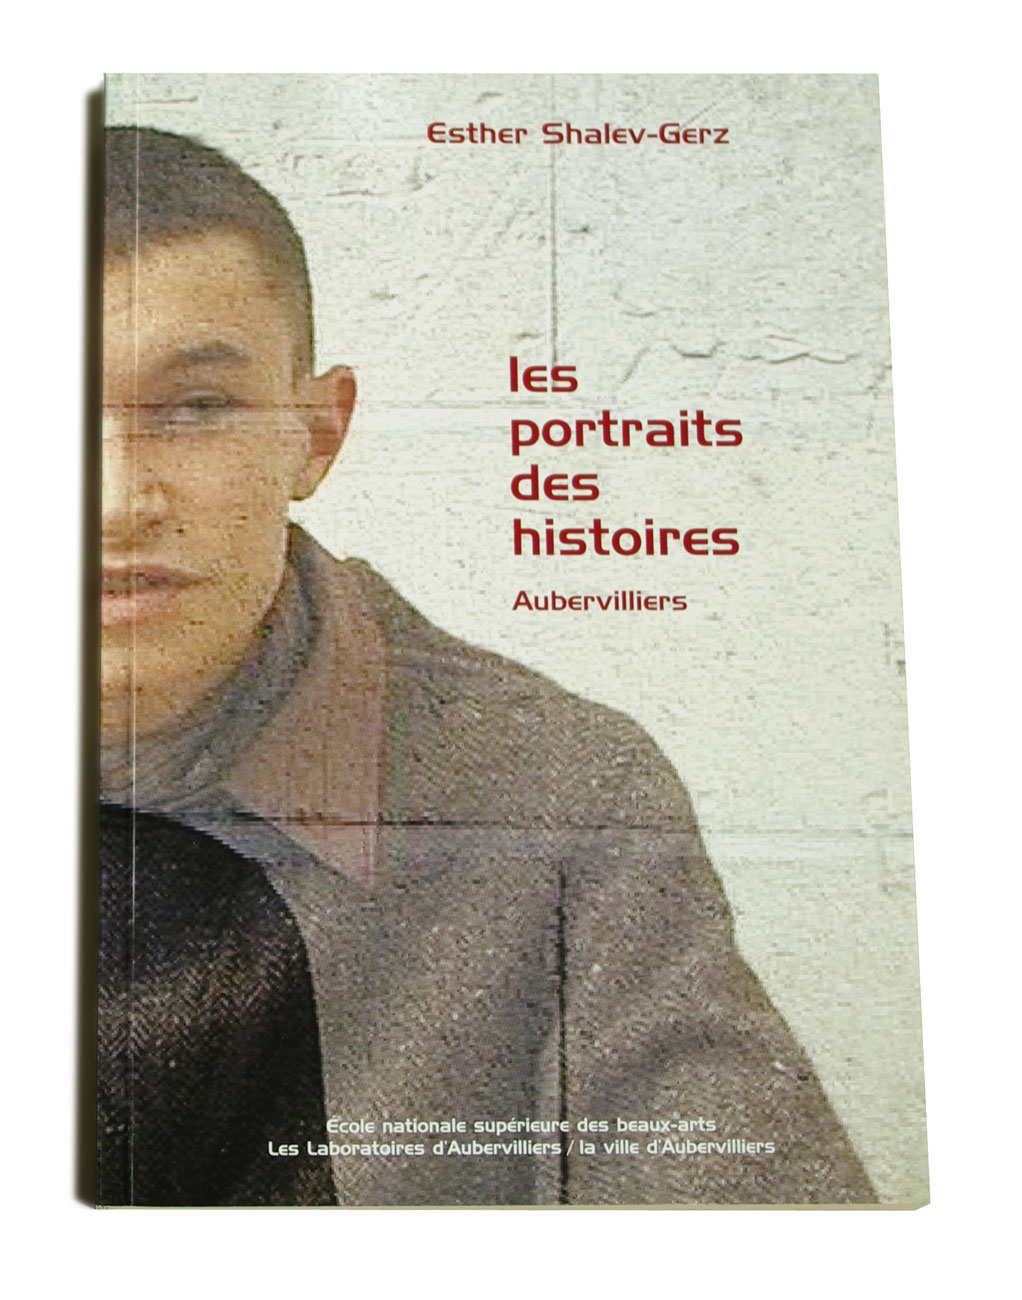 The Portraits of Stories – Aubervilliers